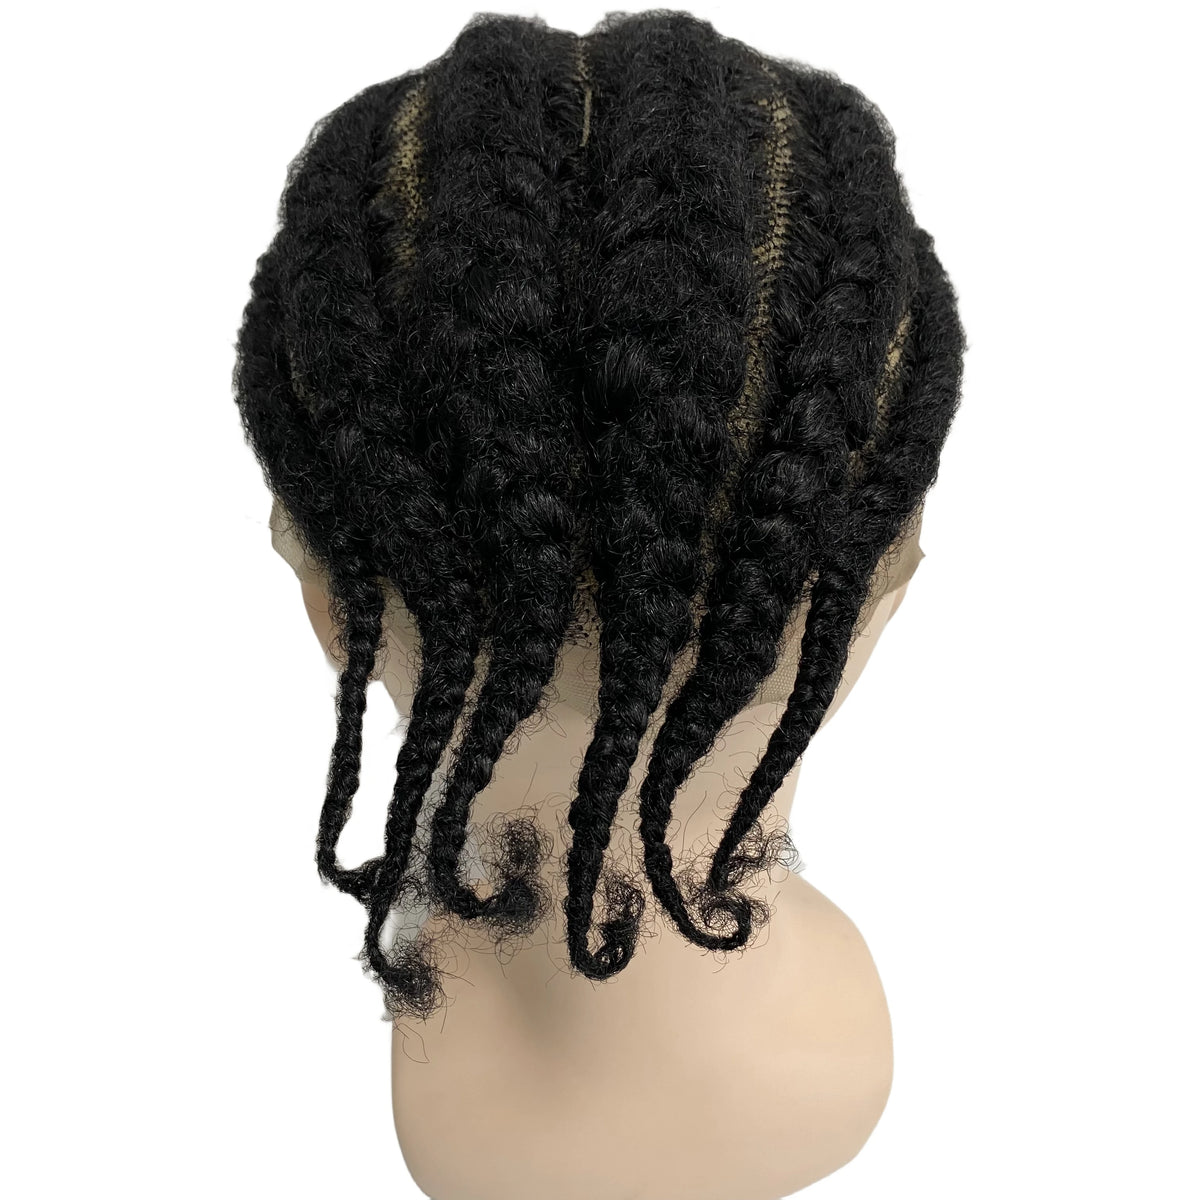 Root Afro Corn Braids Full Lace Replacement Hair System for Men 8x10